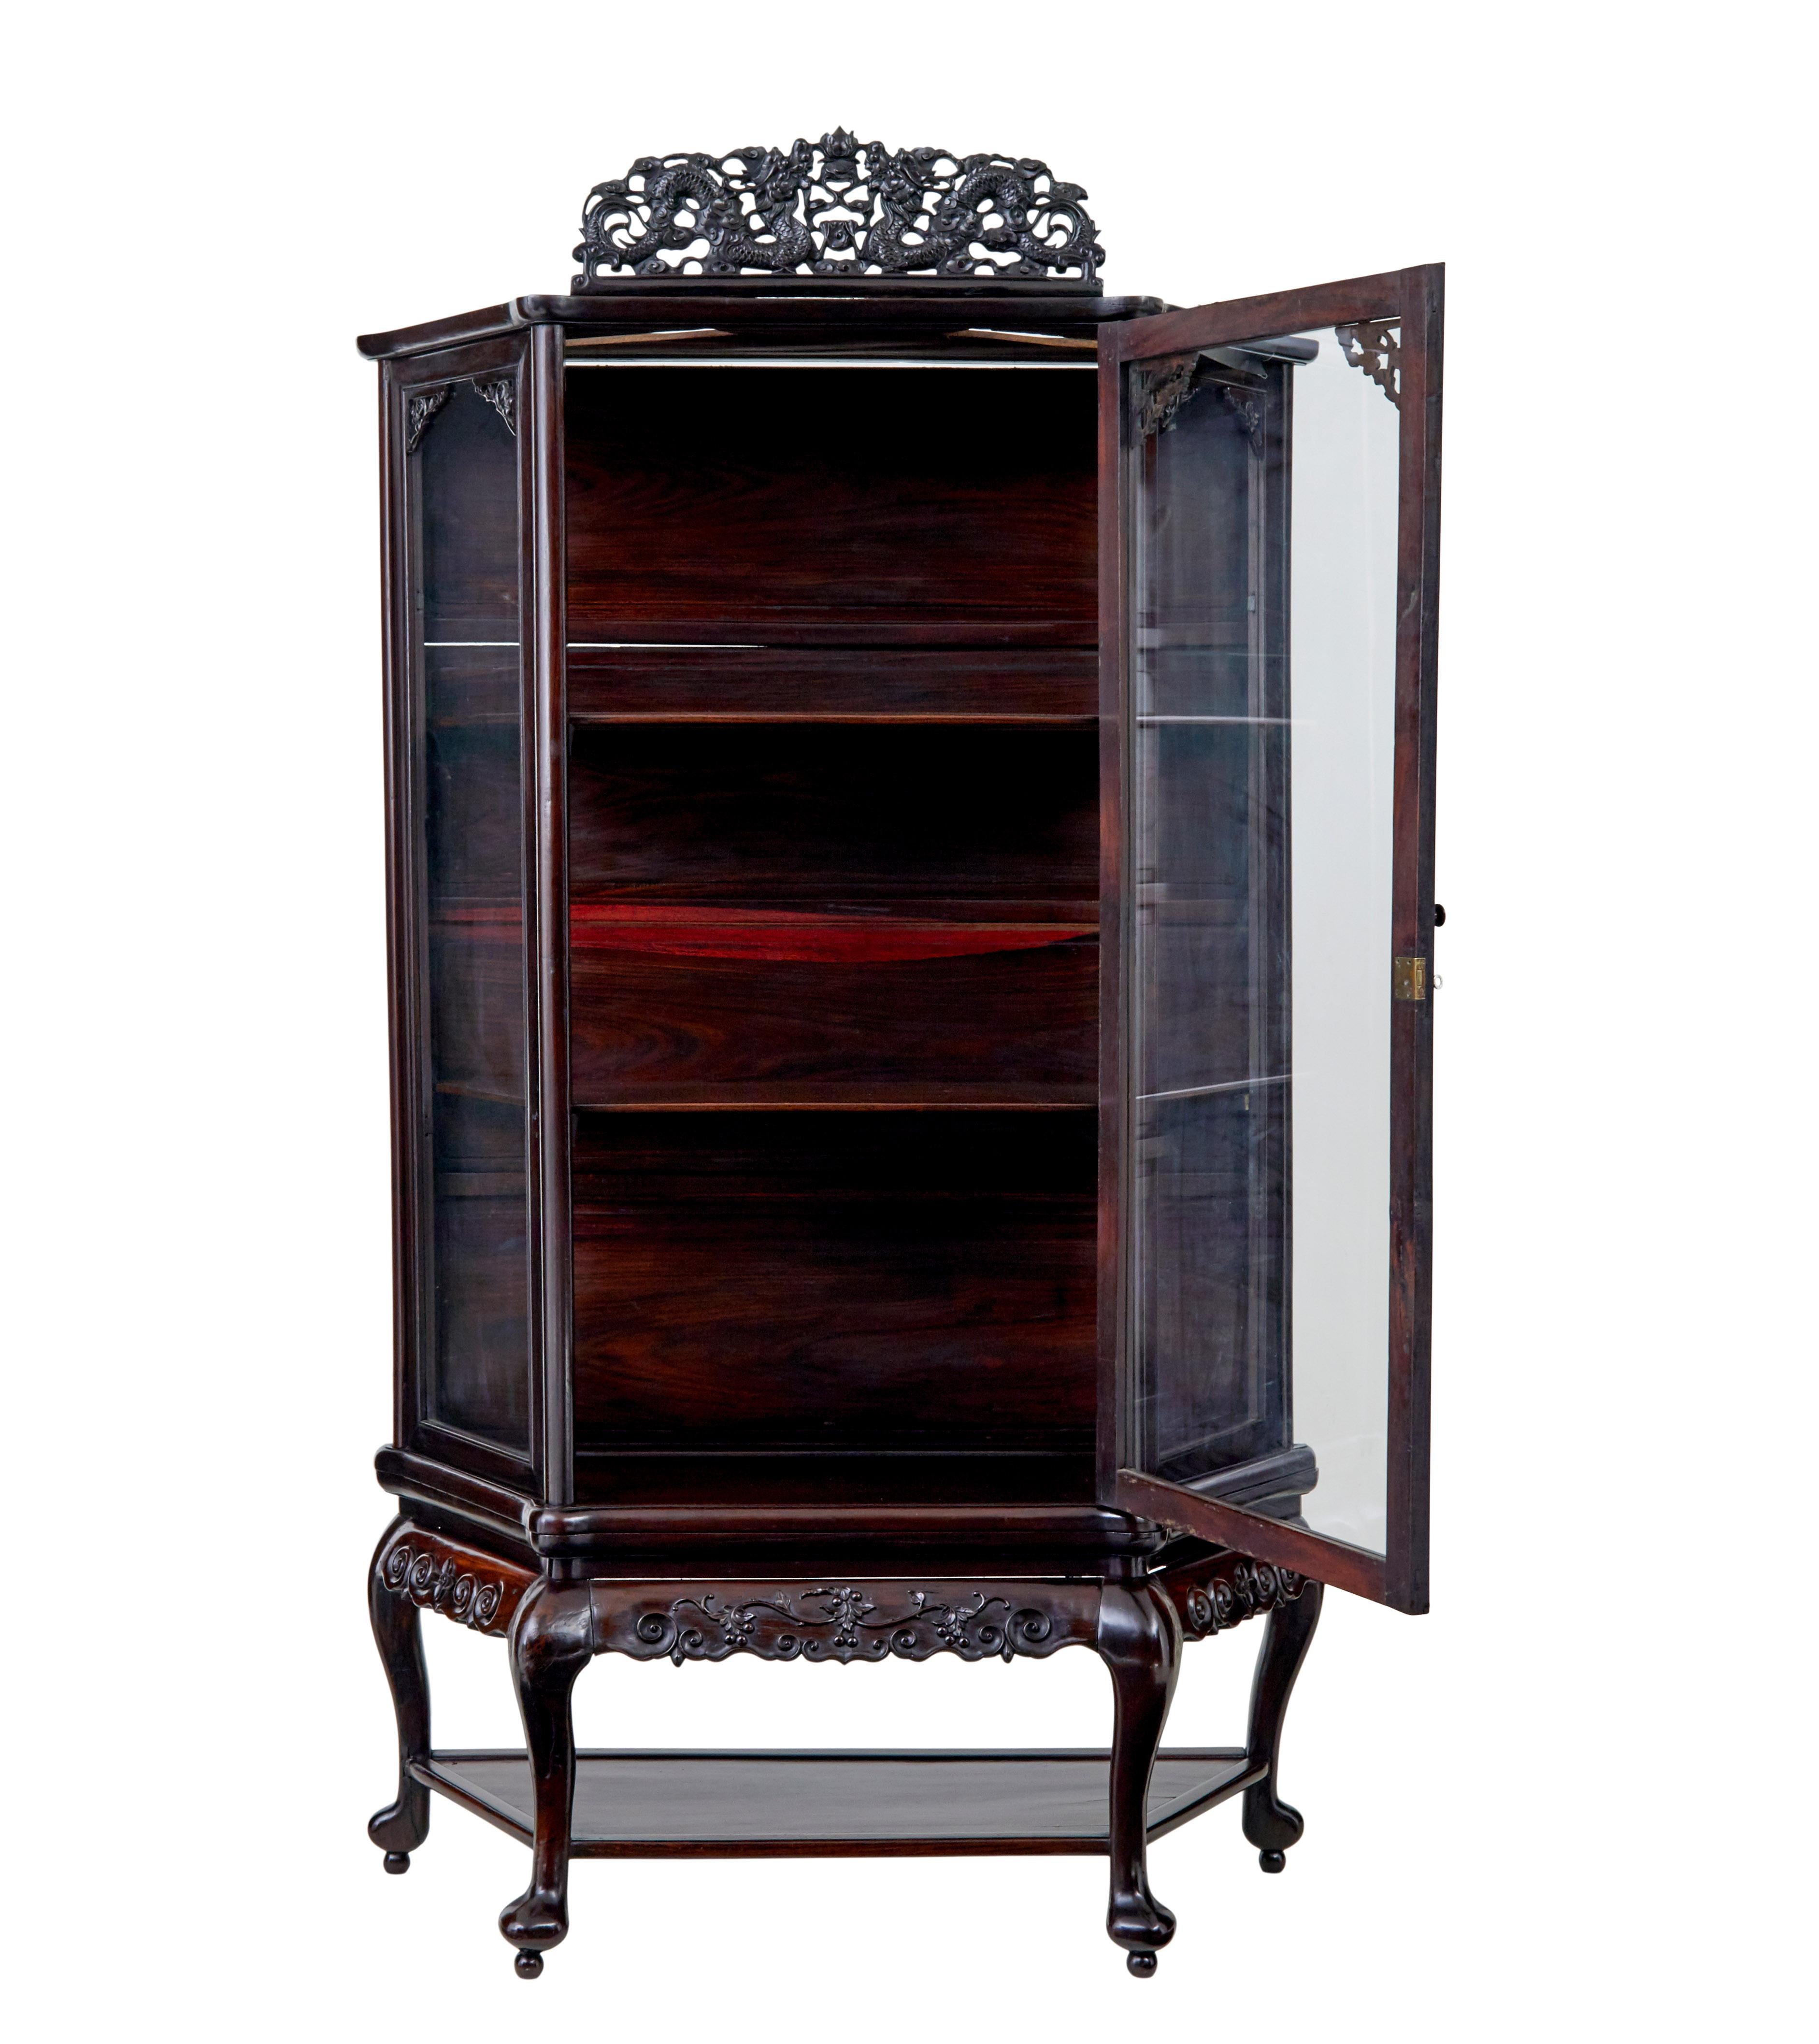 19th century Chinese carved hardwood glazed display cabinet circa 1890

Single large glazed door opens to 2 shelves, stands on 4 shaped legs united by a shelf. Detachable pierced carving of dragons to the top, this would have been flanked either